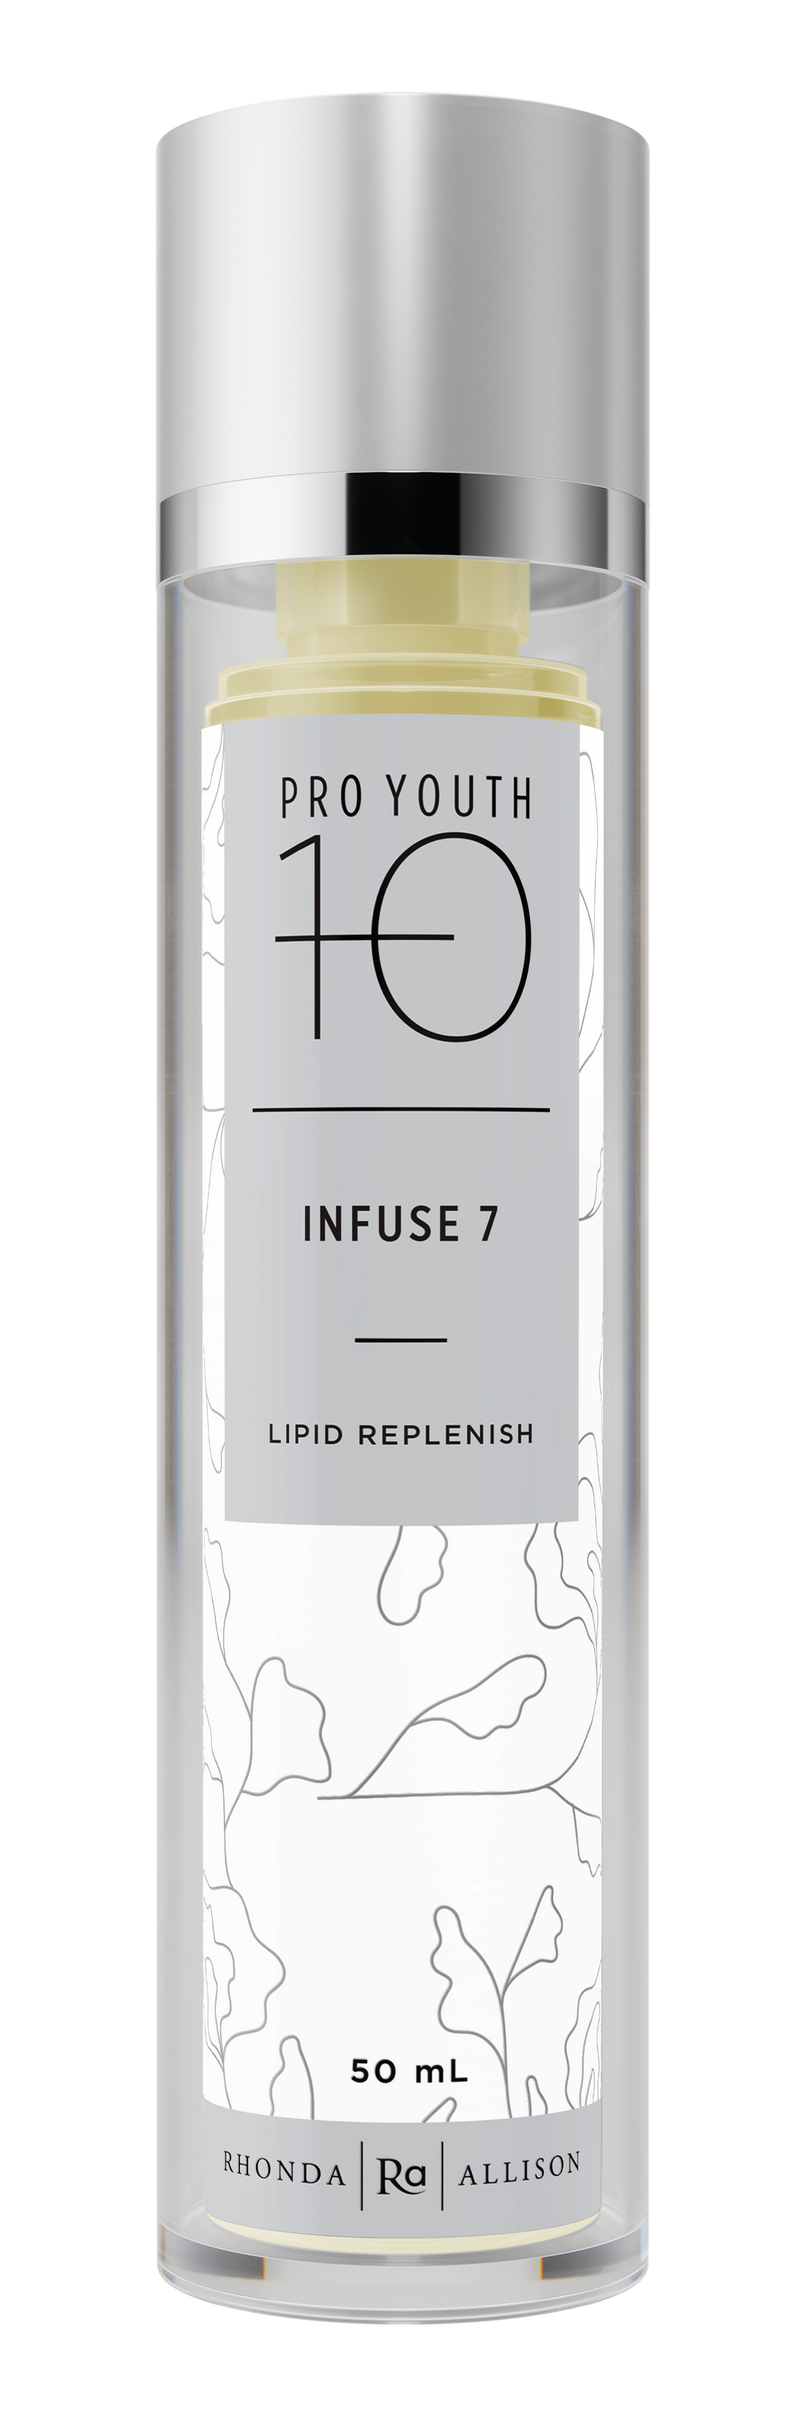 Infuse 7